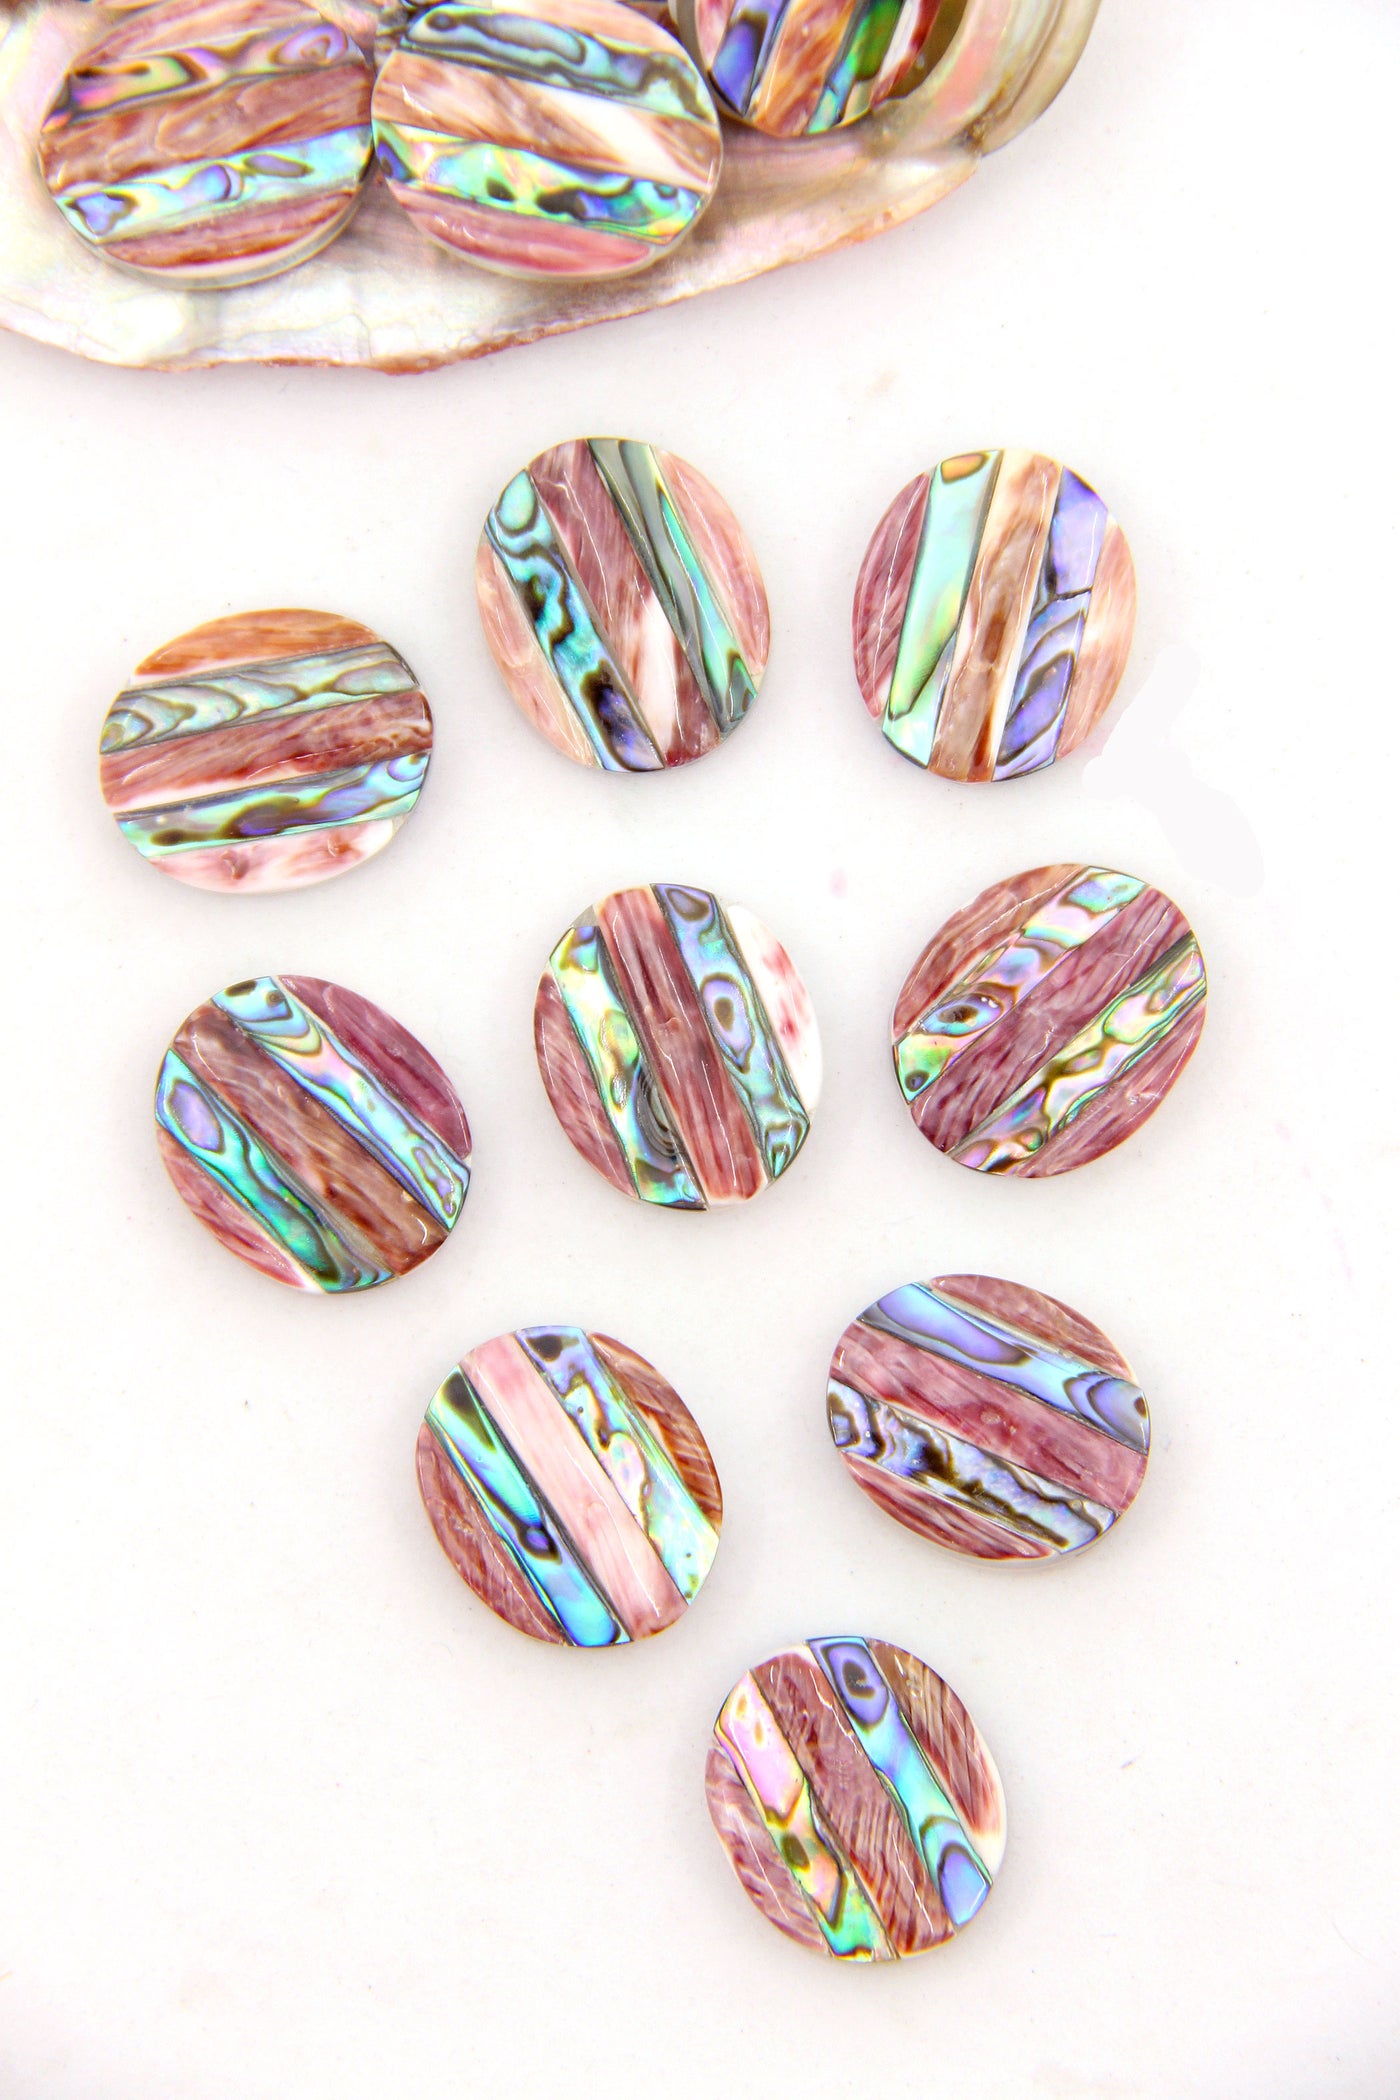 Mexican Purple Spiny Oyster & Abalone Inlaid Striped Oval Bead, 1 Charm